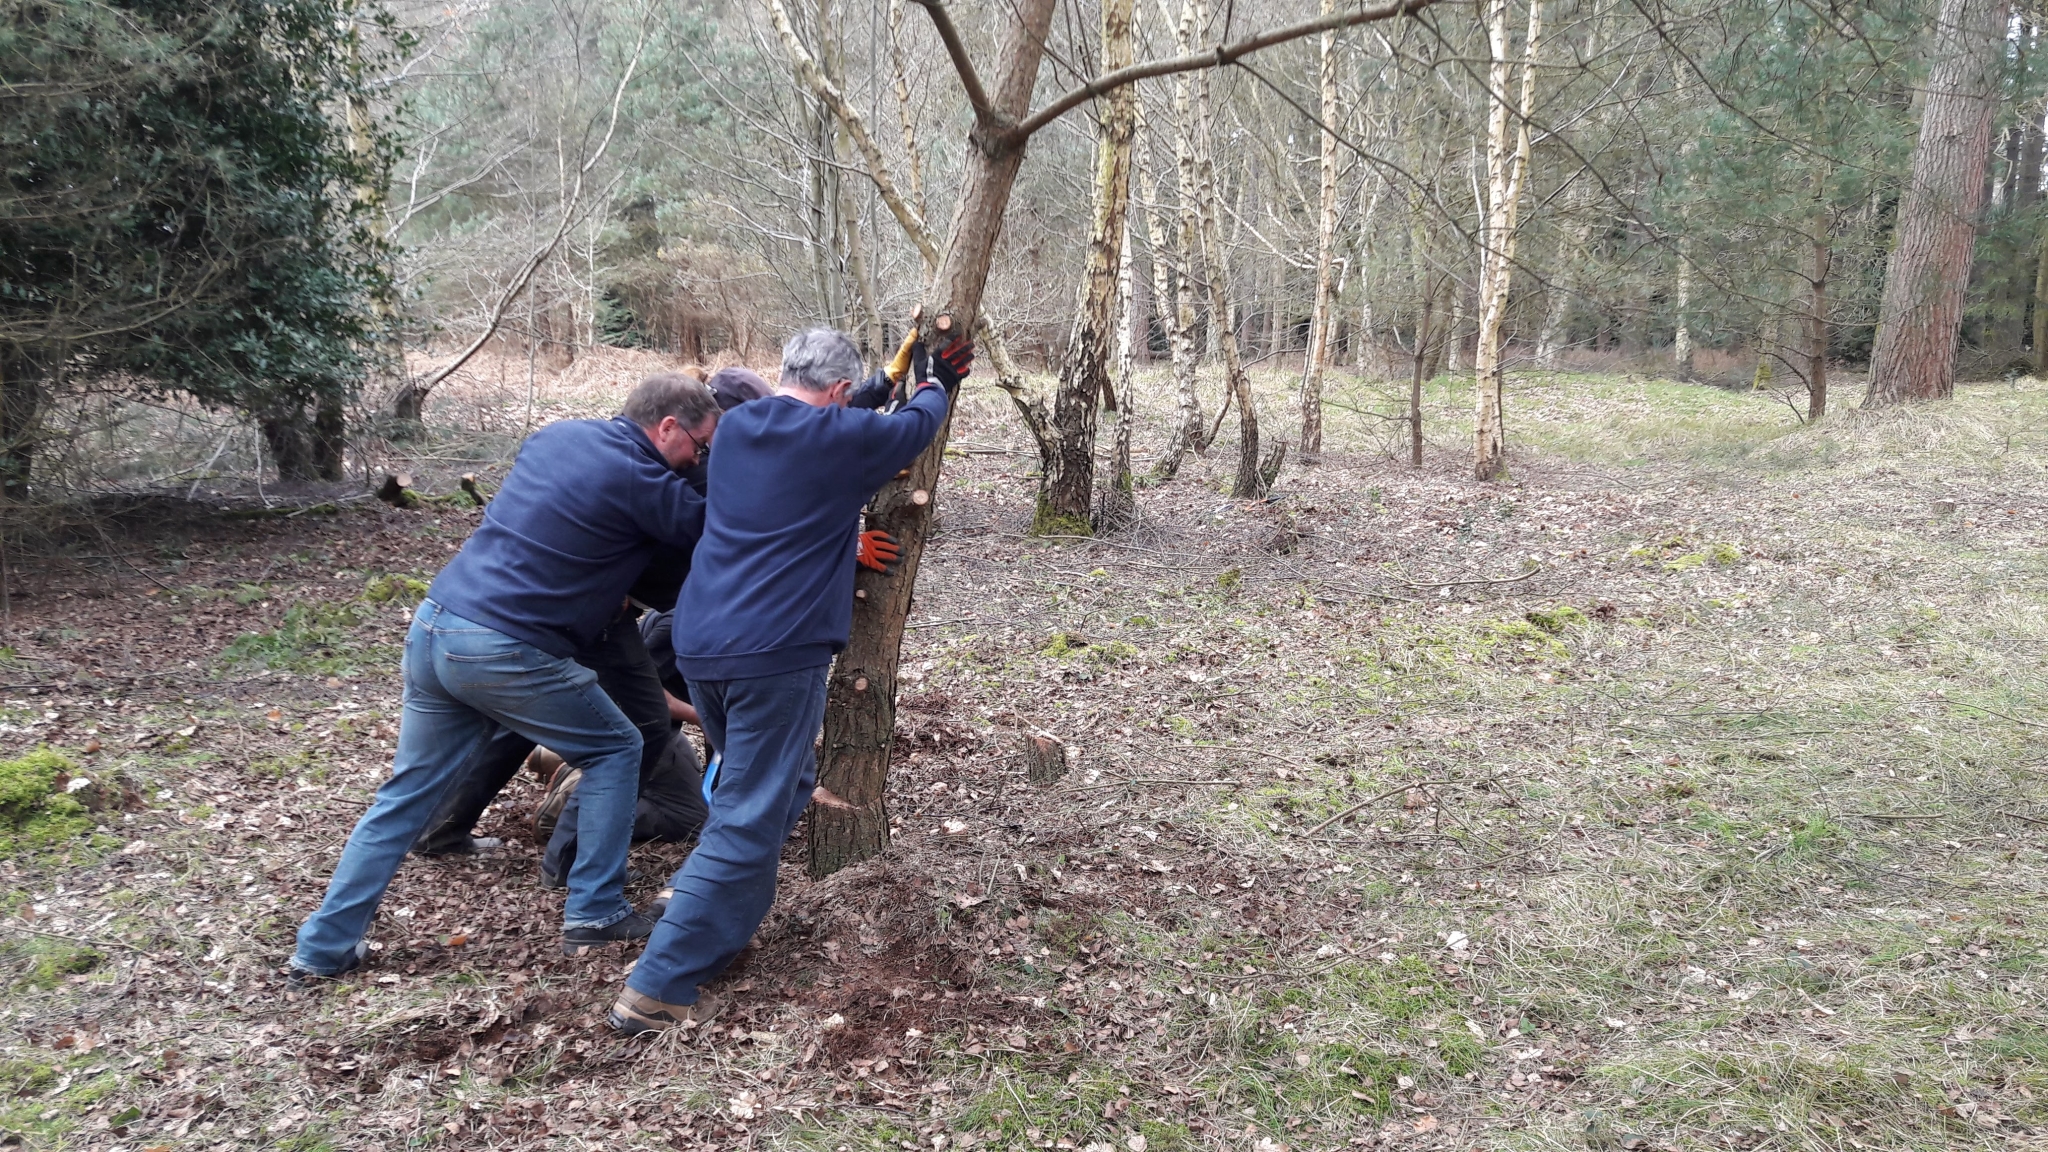 A photo from the FoTF Conservation Event - April 2018 - Improving habitat at High Lodge : Volunteers push over the tree having sawn through the trunk